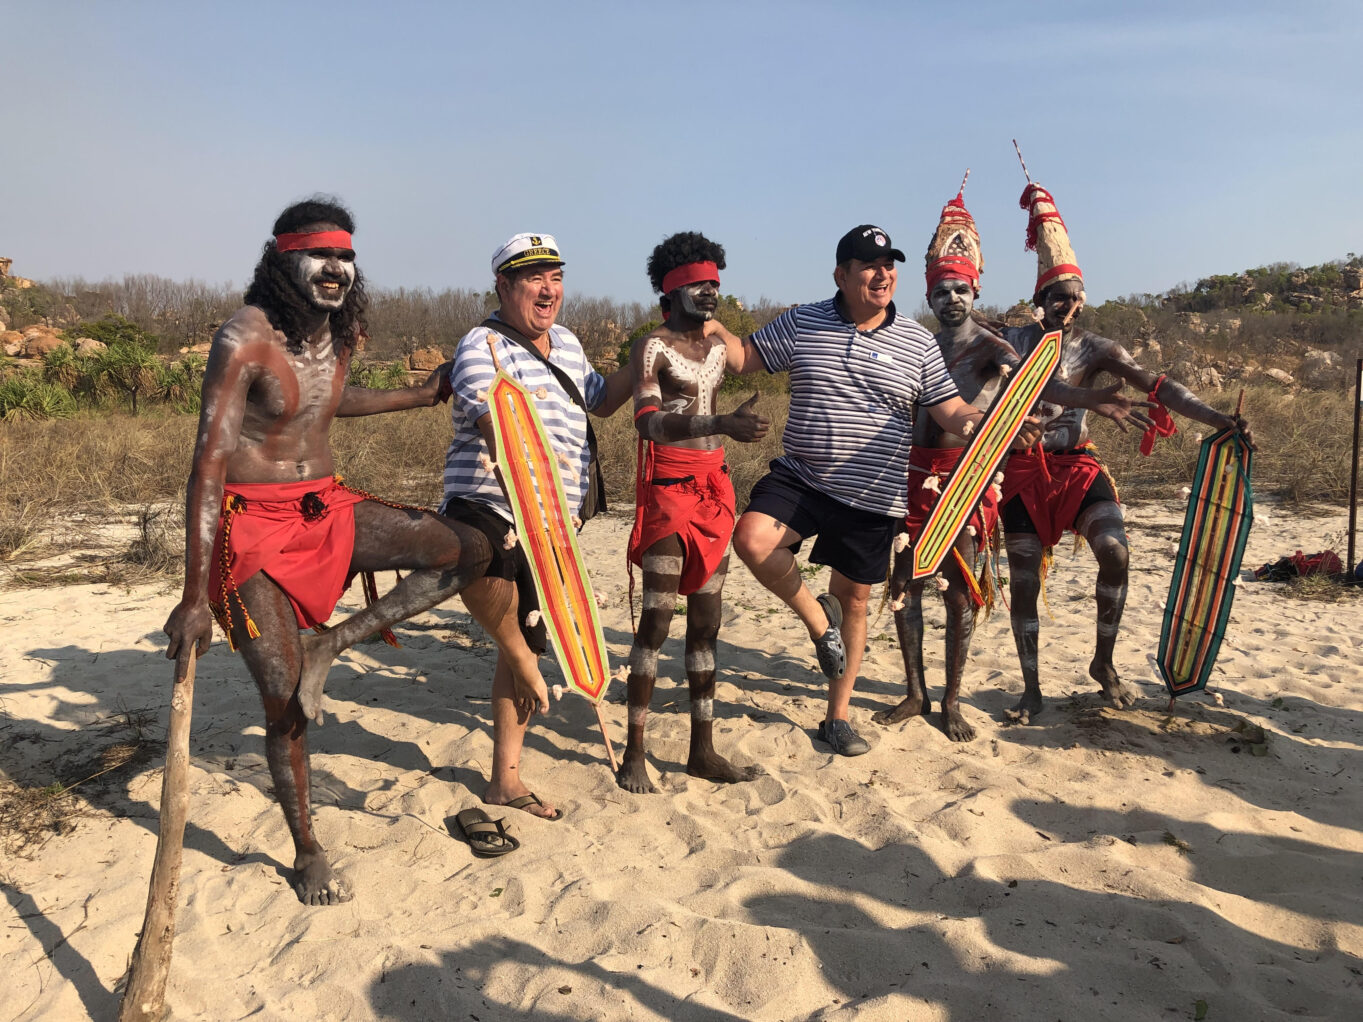 Guests of Seabourn with the Wunambal Gaambera Traditional Owners